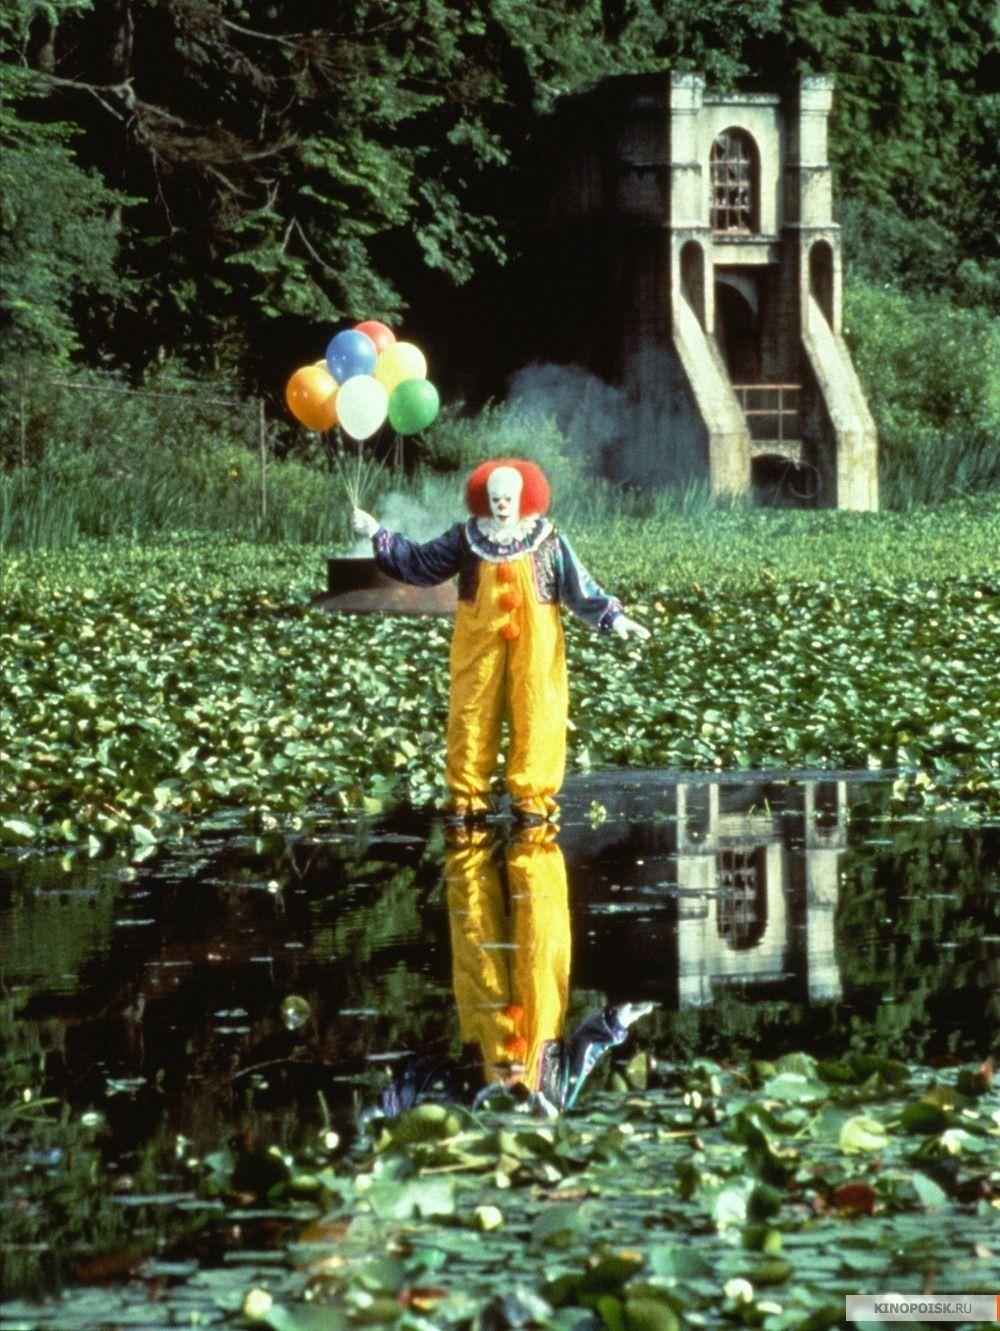 Pennywise the Clown (1990) OMG